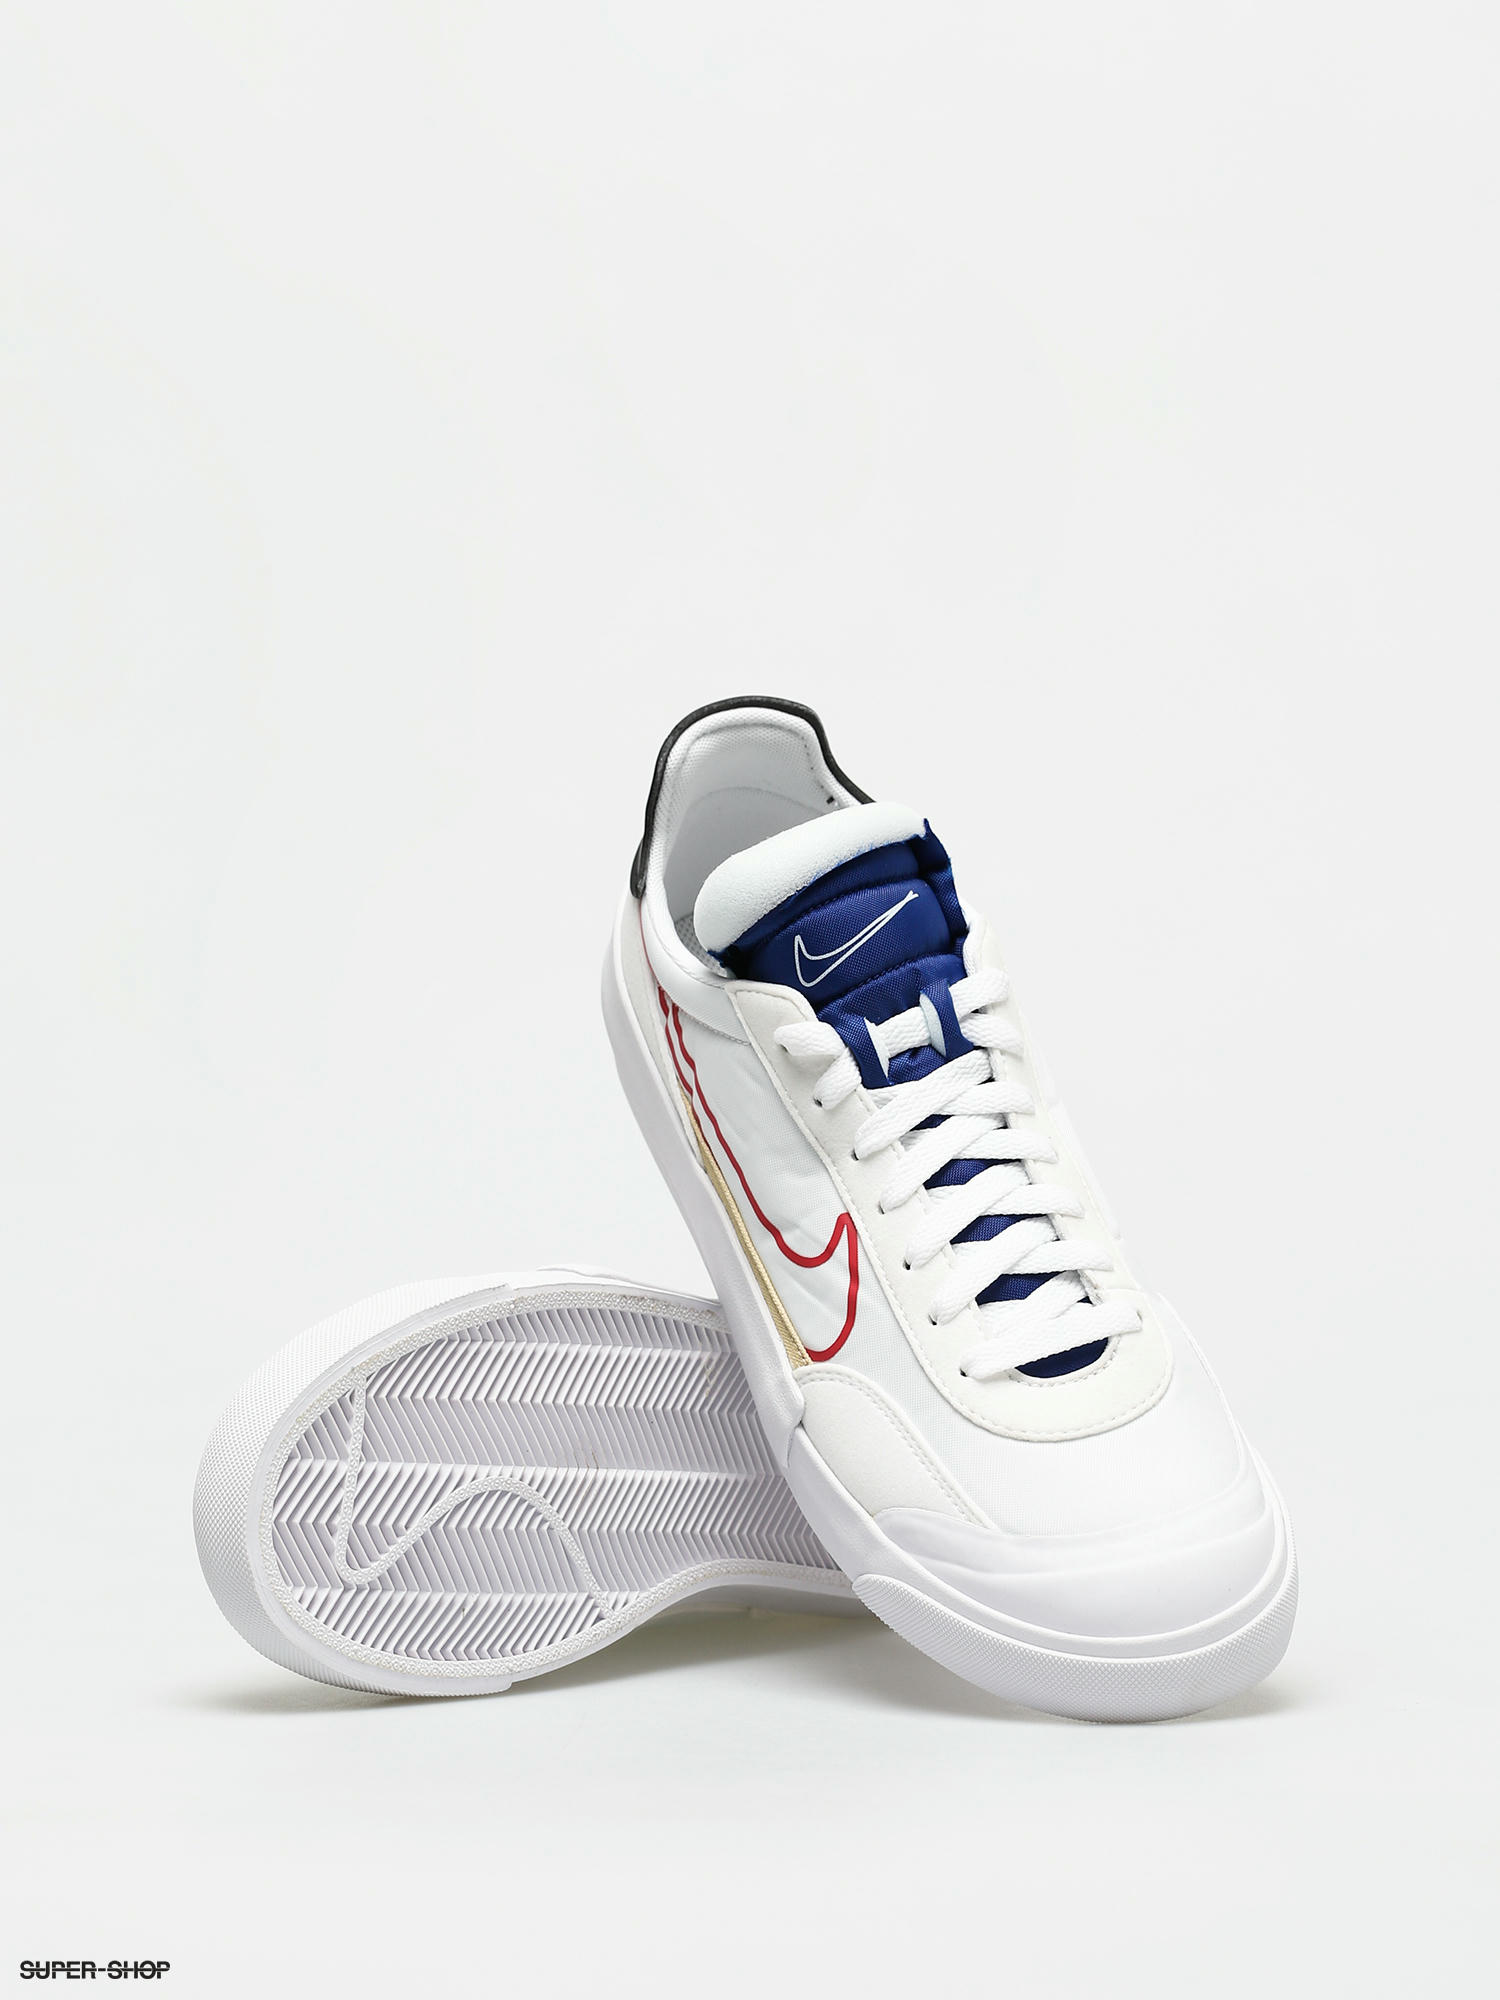 white and royal blue nike shoes